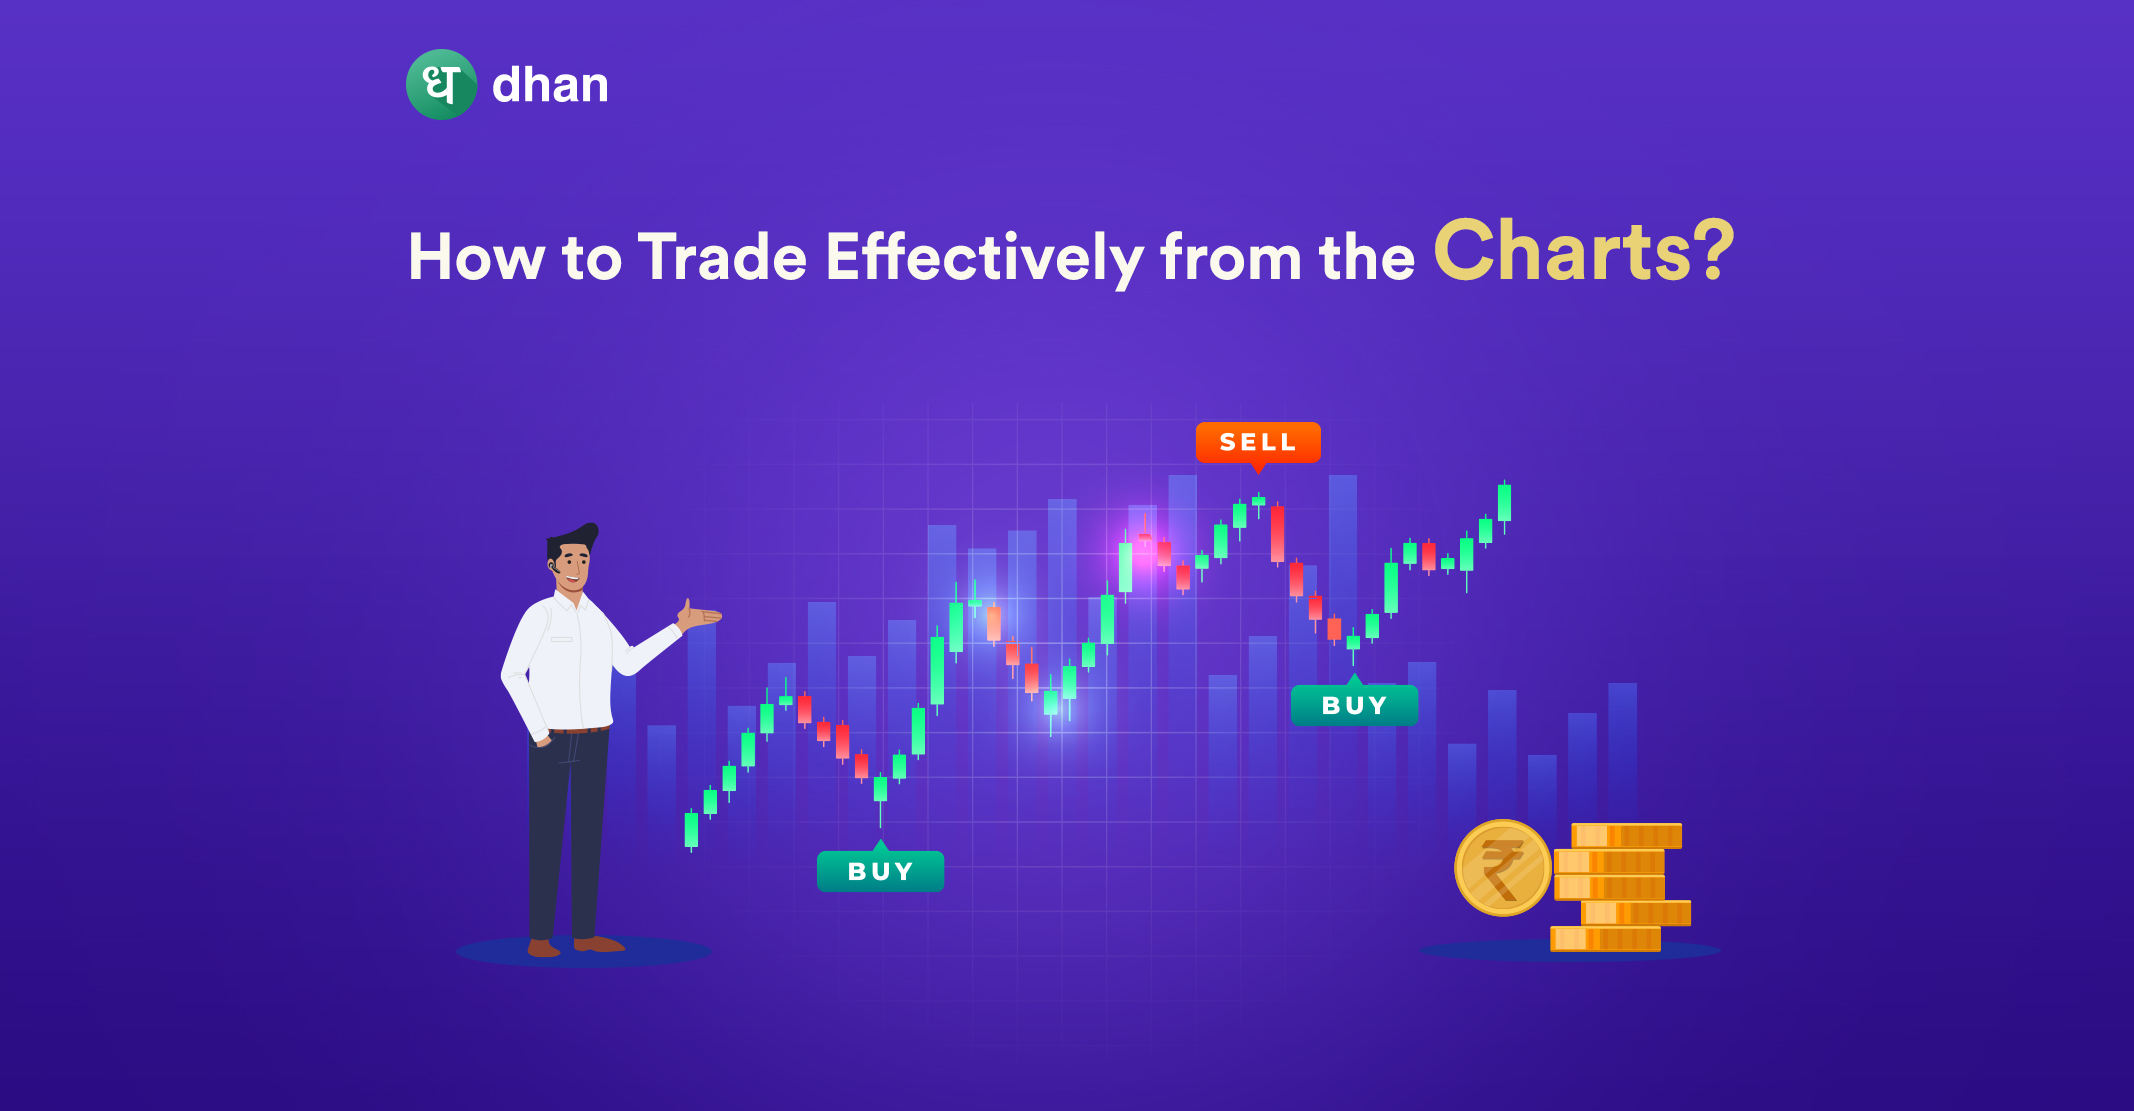 How to Trade Effectively by Trading Directly from Charts